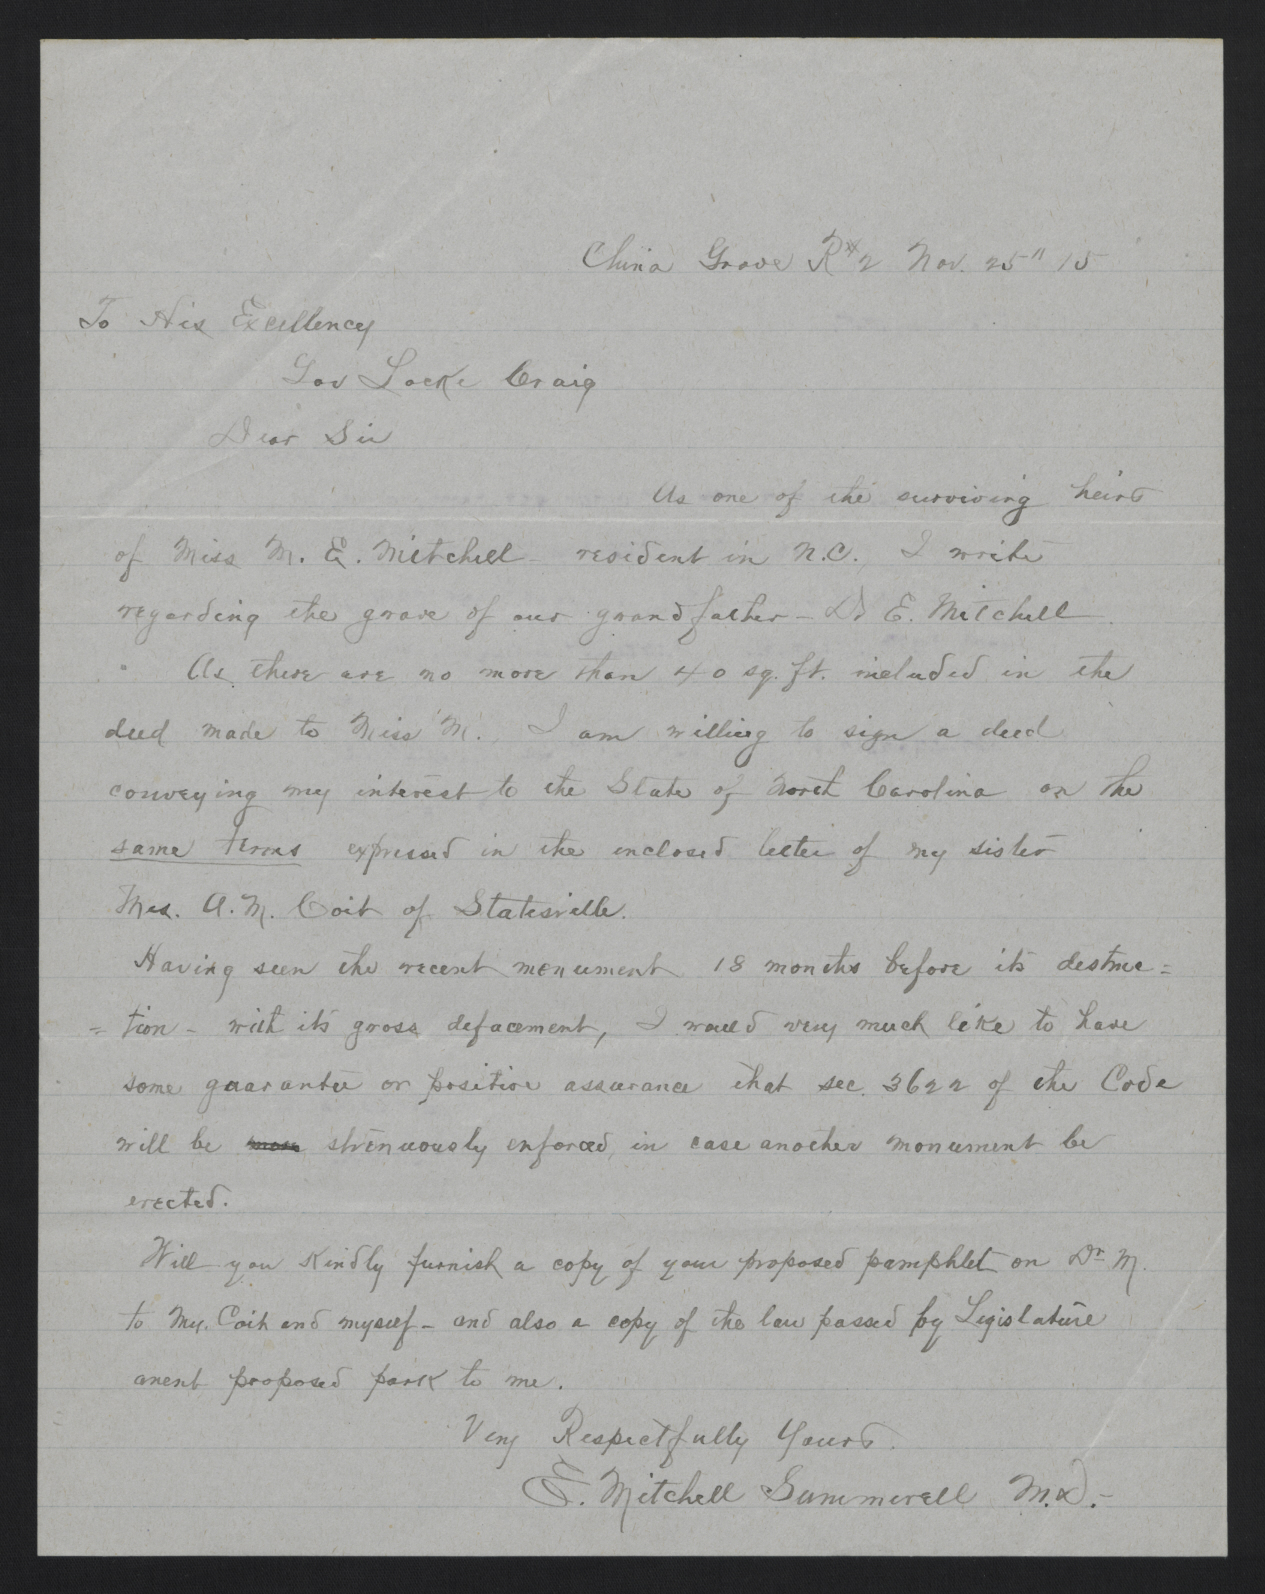 Letter from Summerell to Craig, November 25, 1915